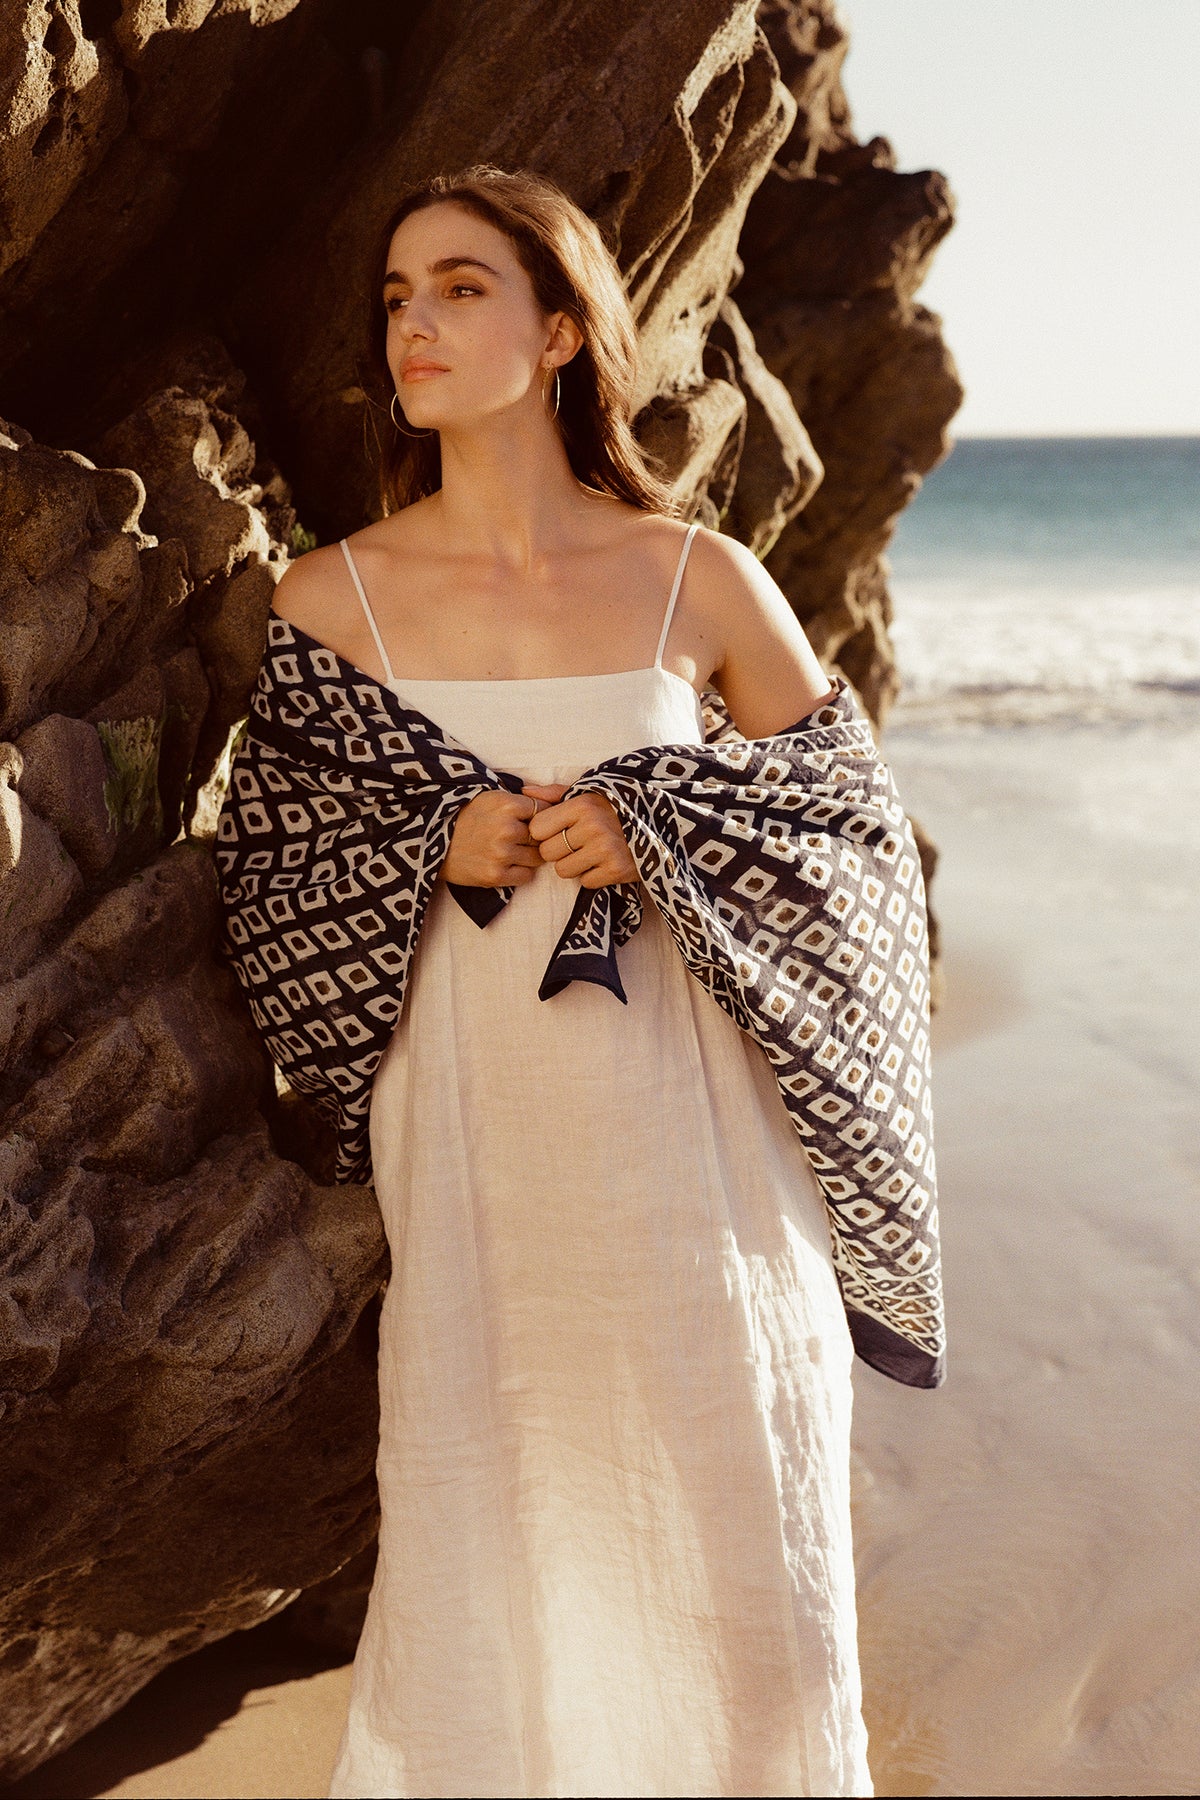 A woman in a white dress and patterned shawl from Velvet by Graham & Spencer stands beside a rocky beach, gazing to her left with the ocean in the background.-36752951640257